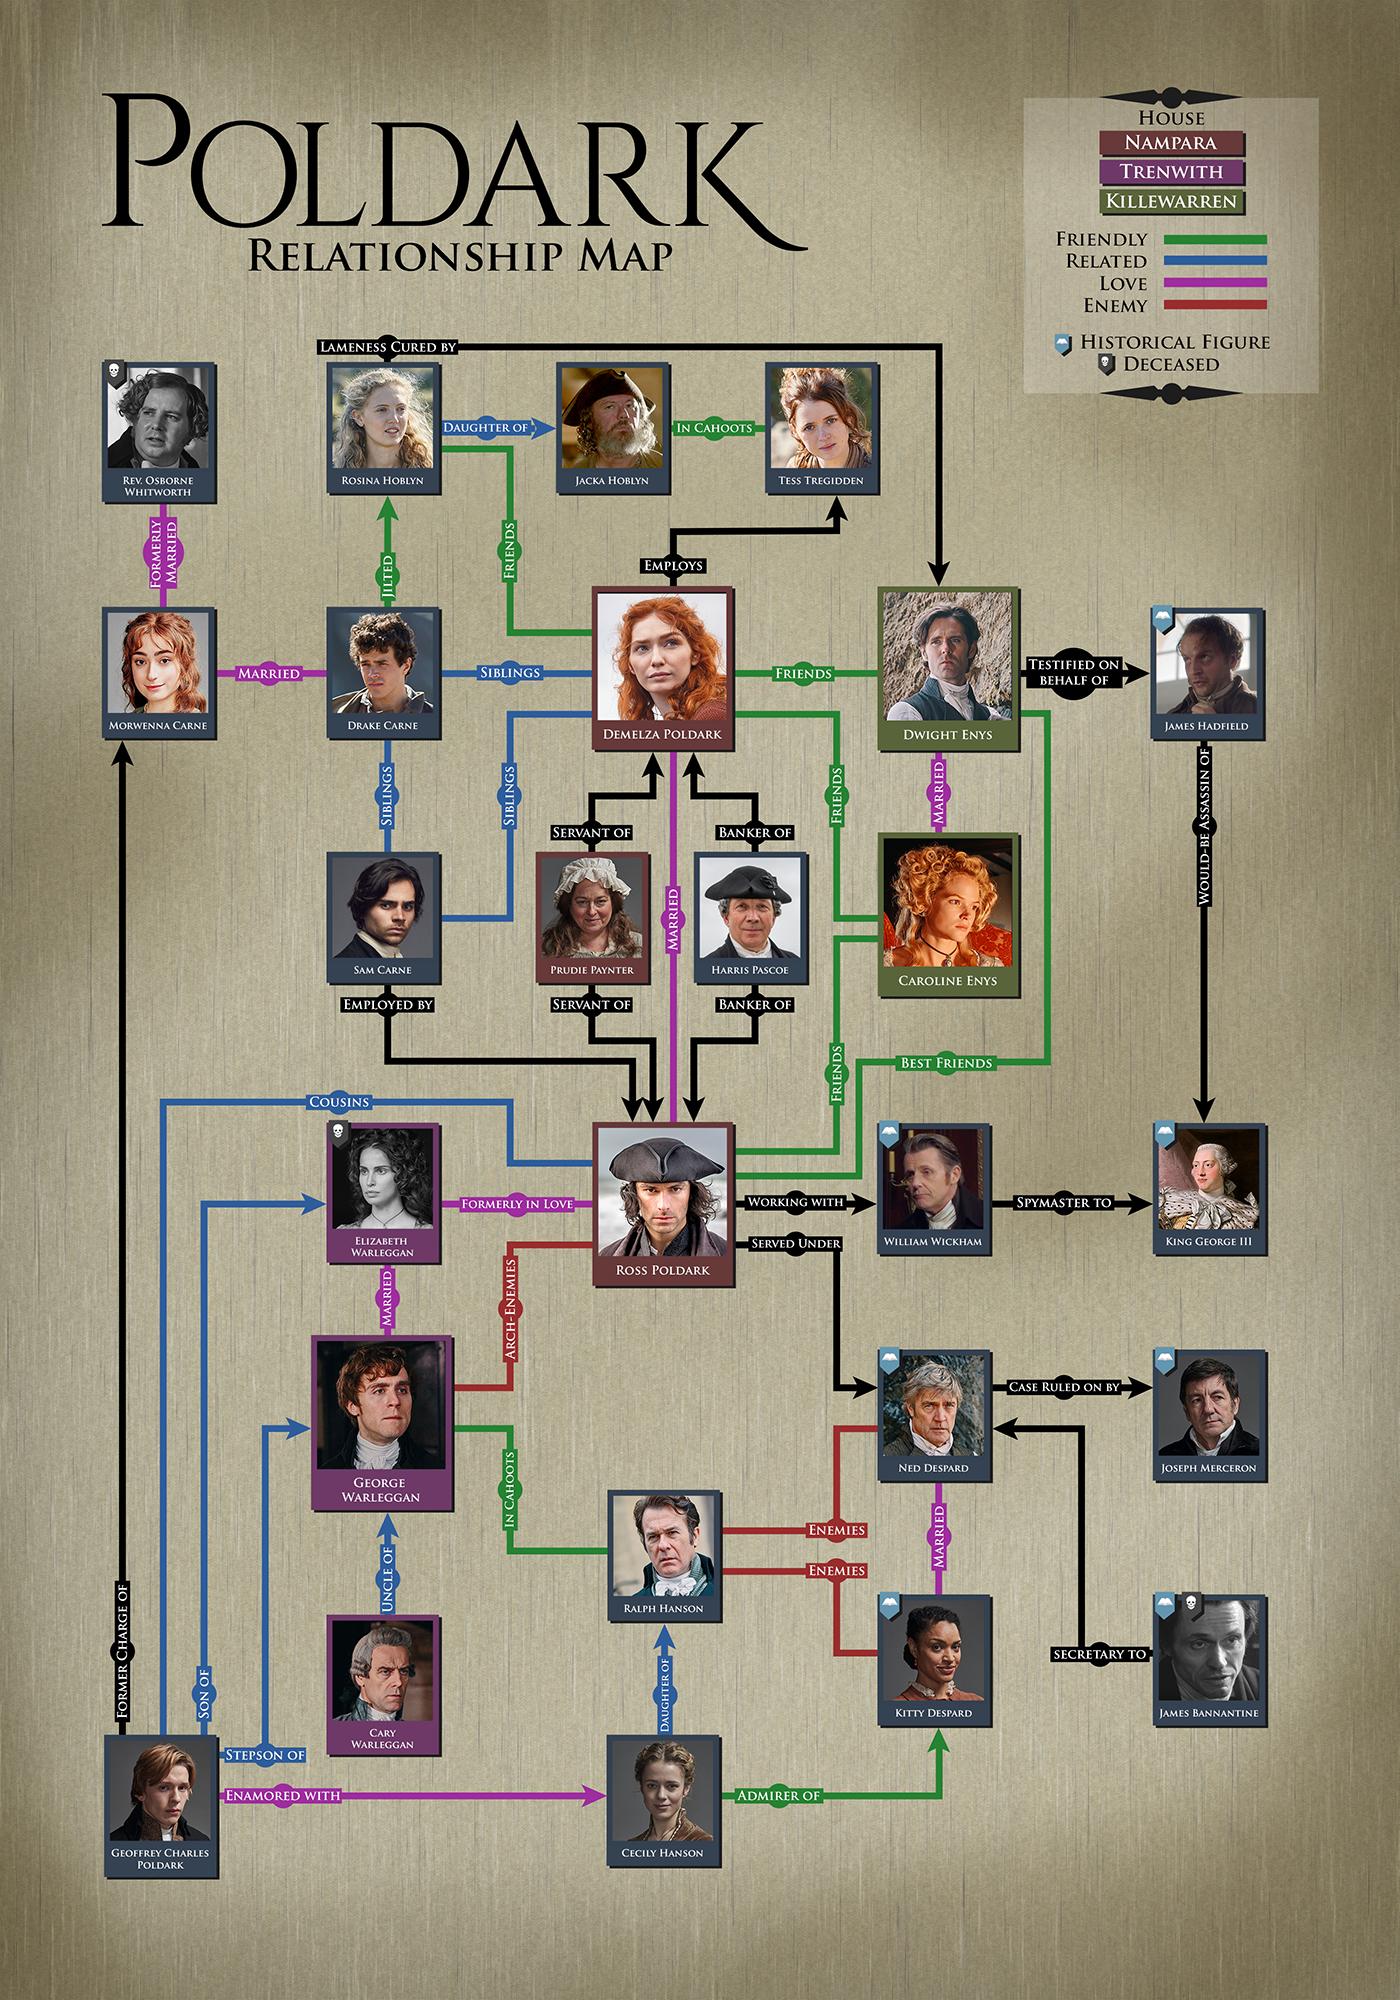 A map of the relationships in Poldark